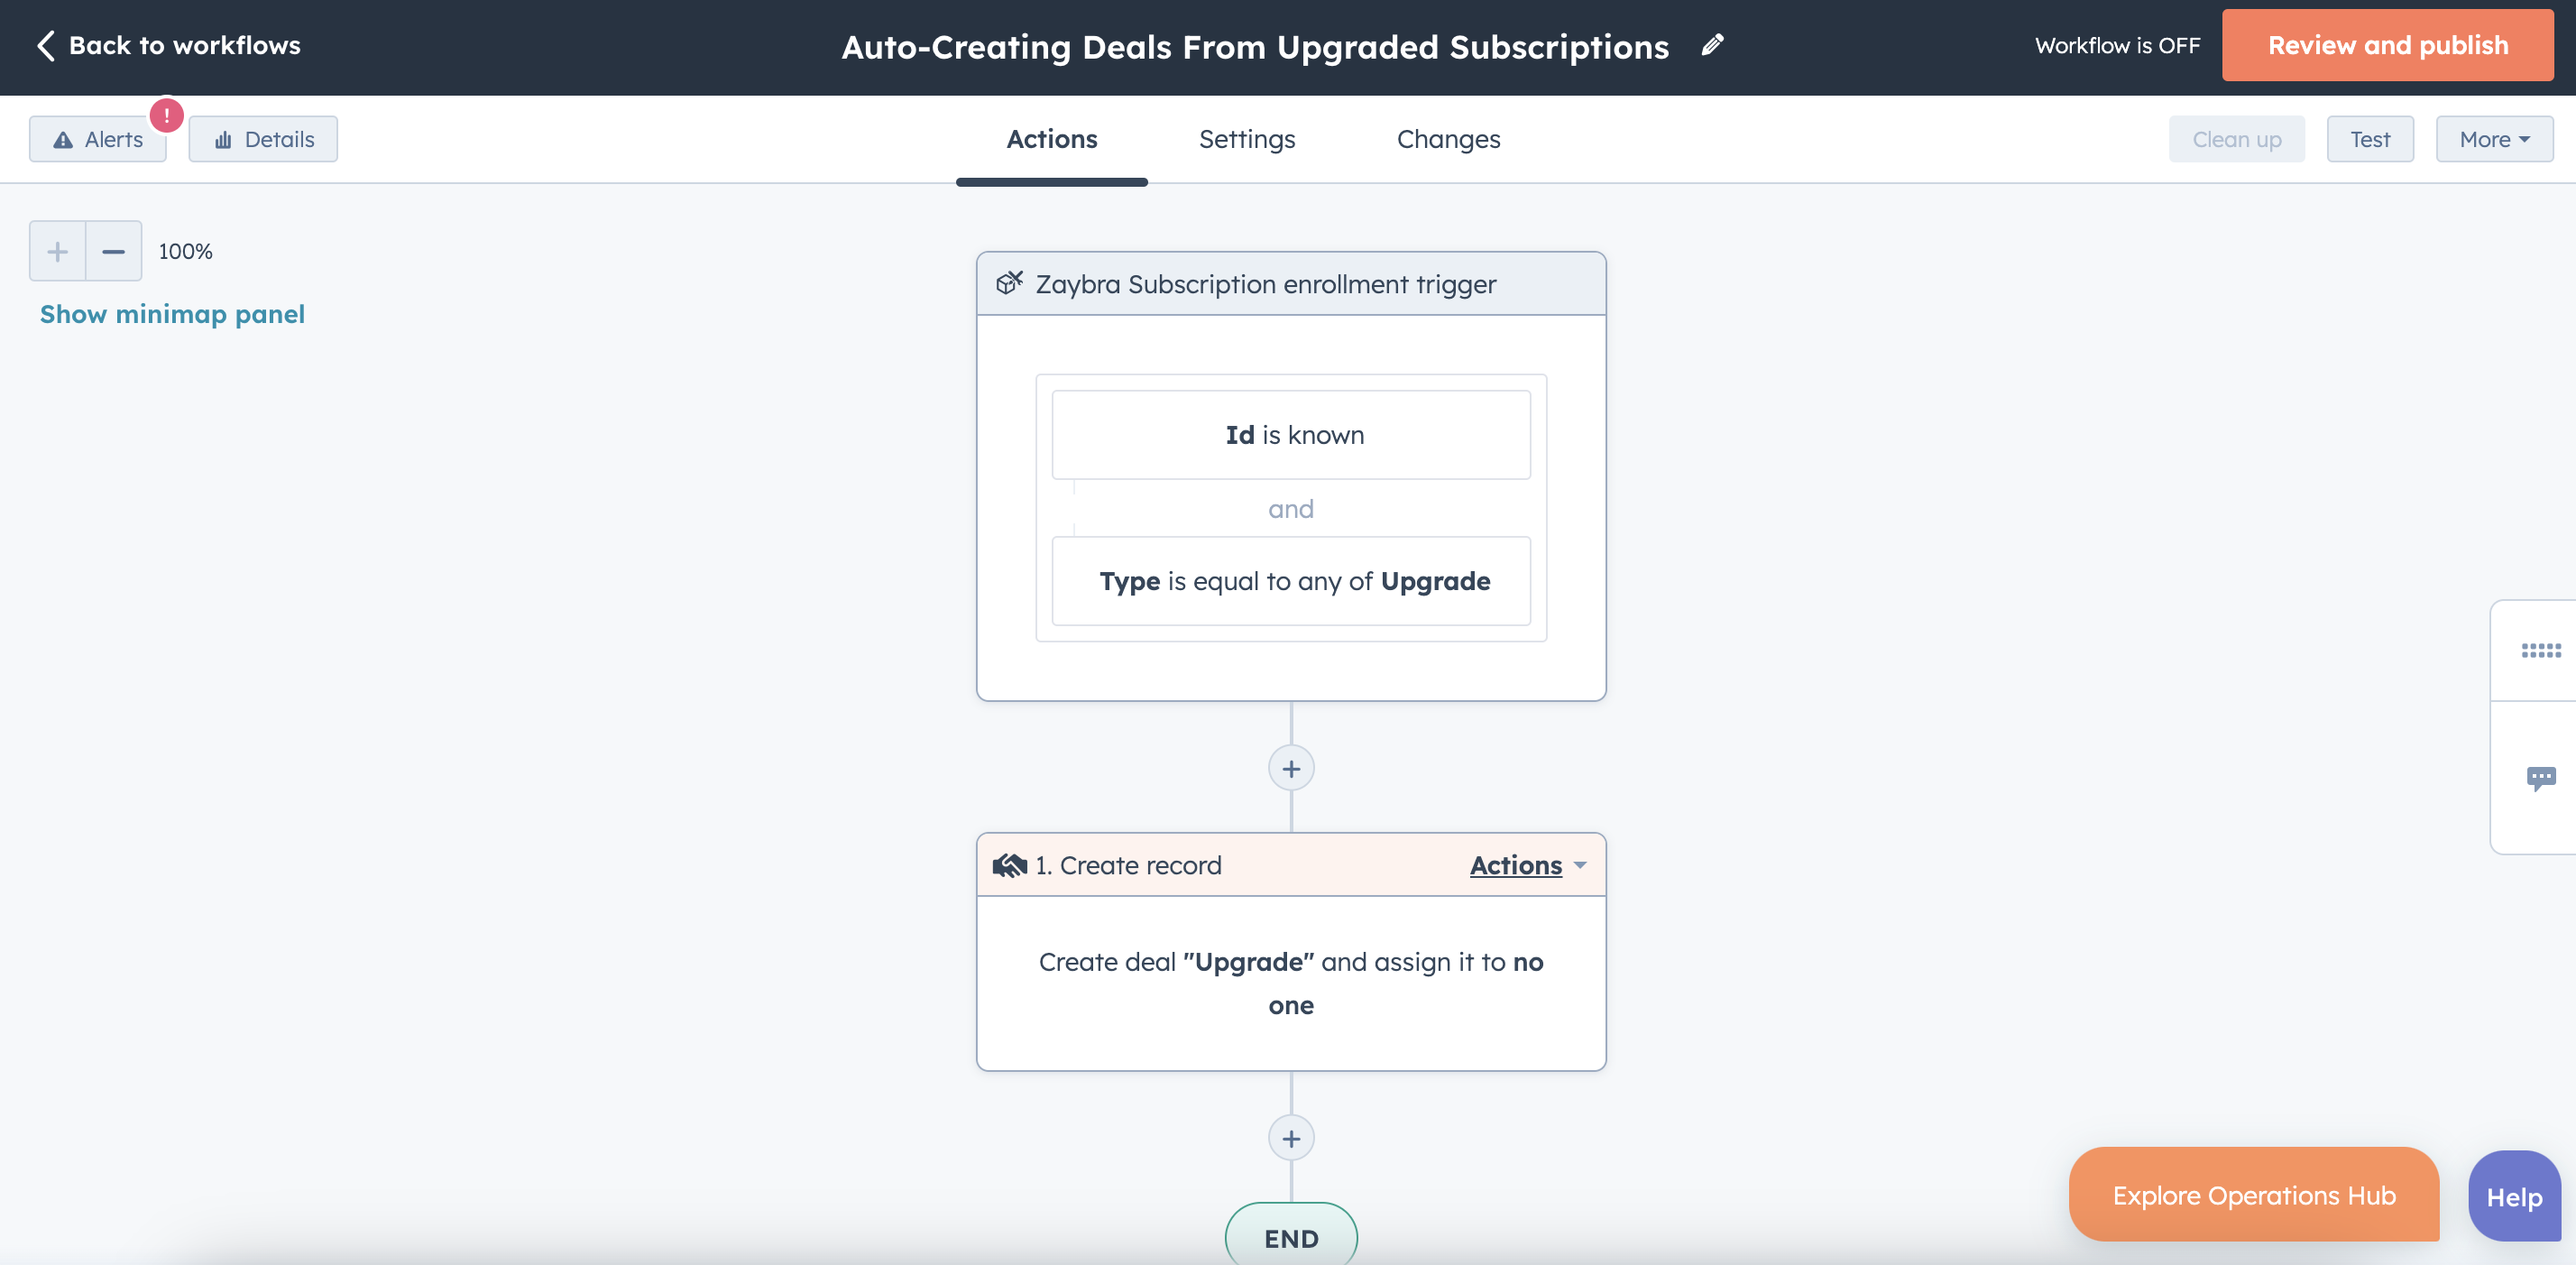 Auto-Creating Deals From Upgraded Subscriptions